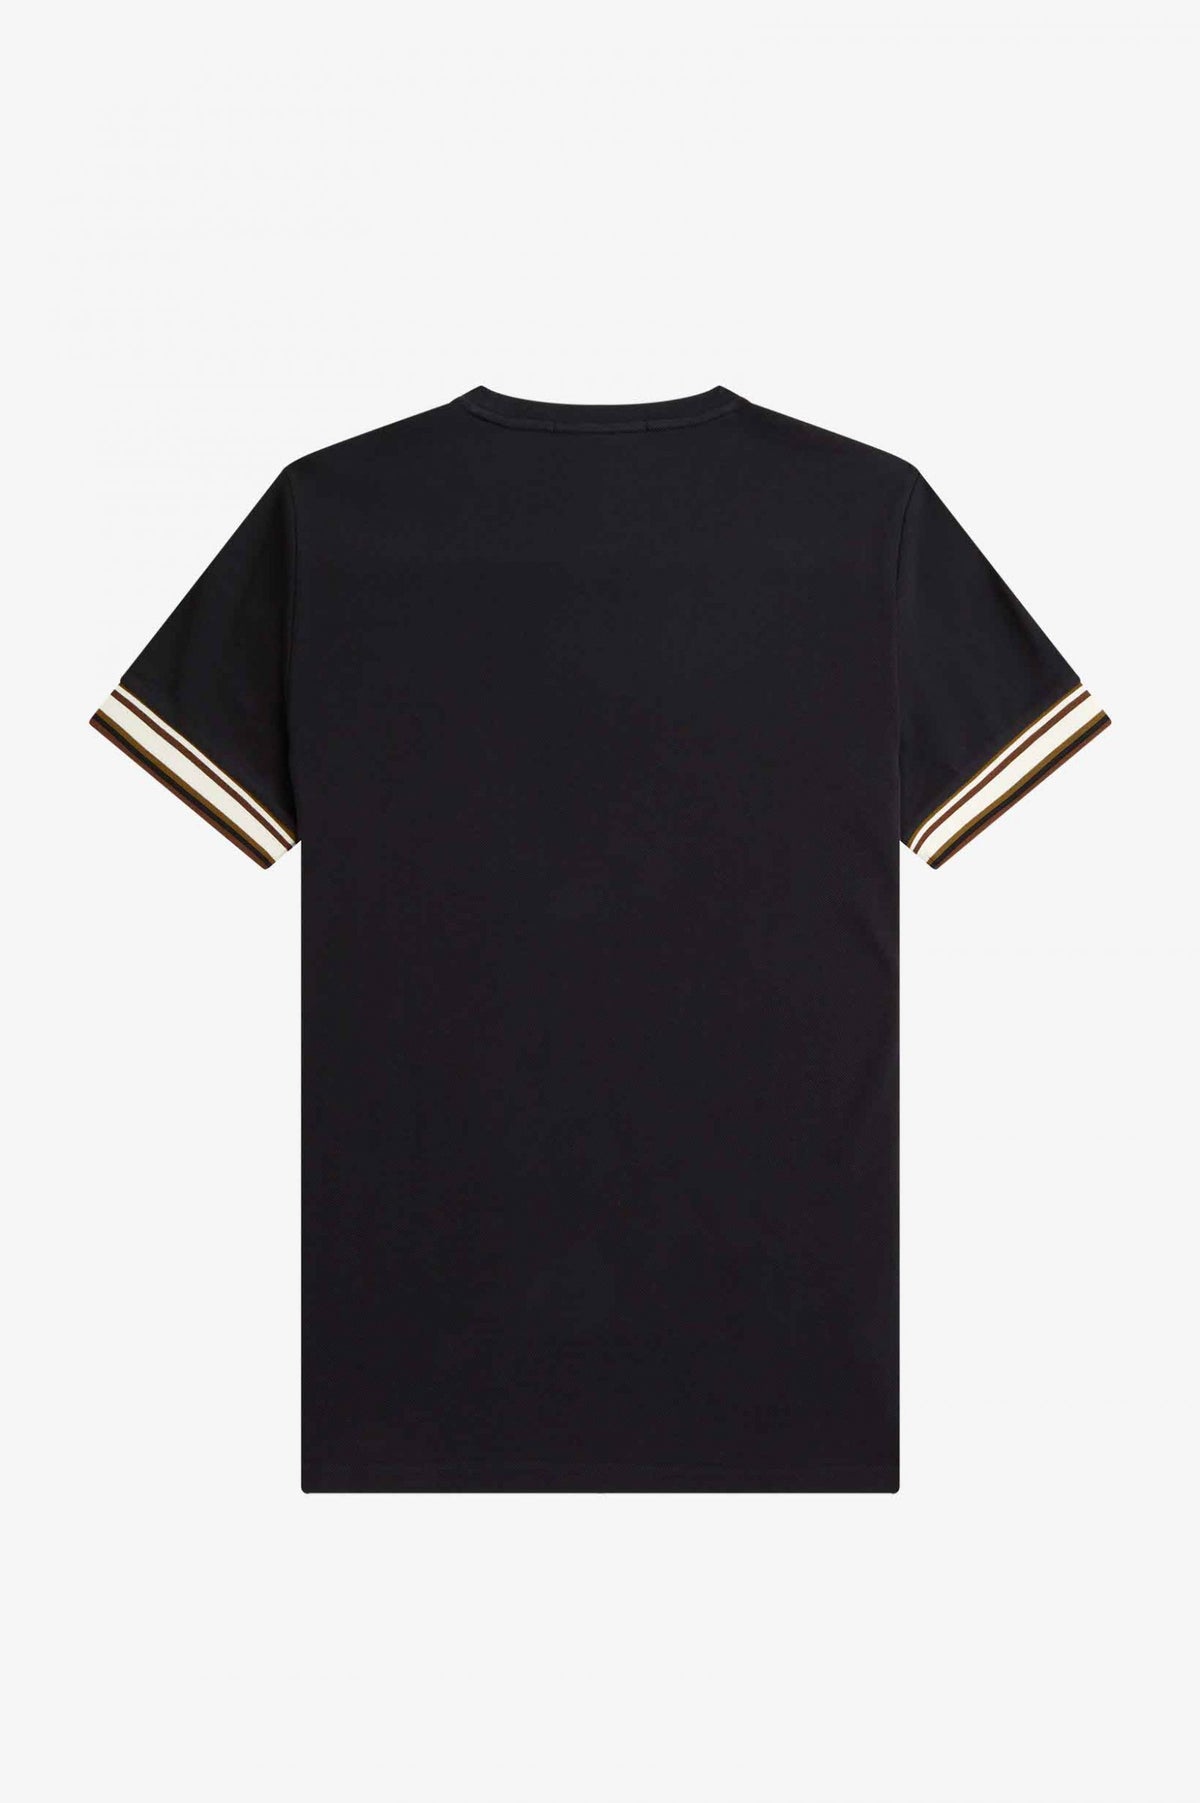 FRED PERRY M6568 T-SHIRT - BLACK